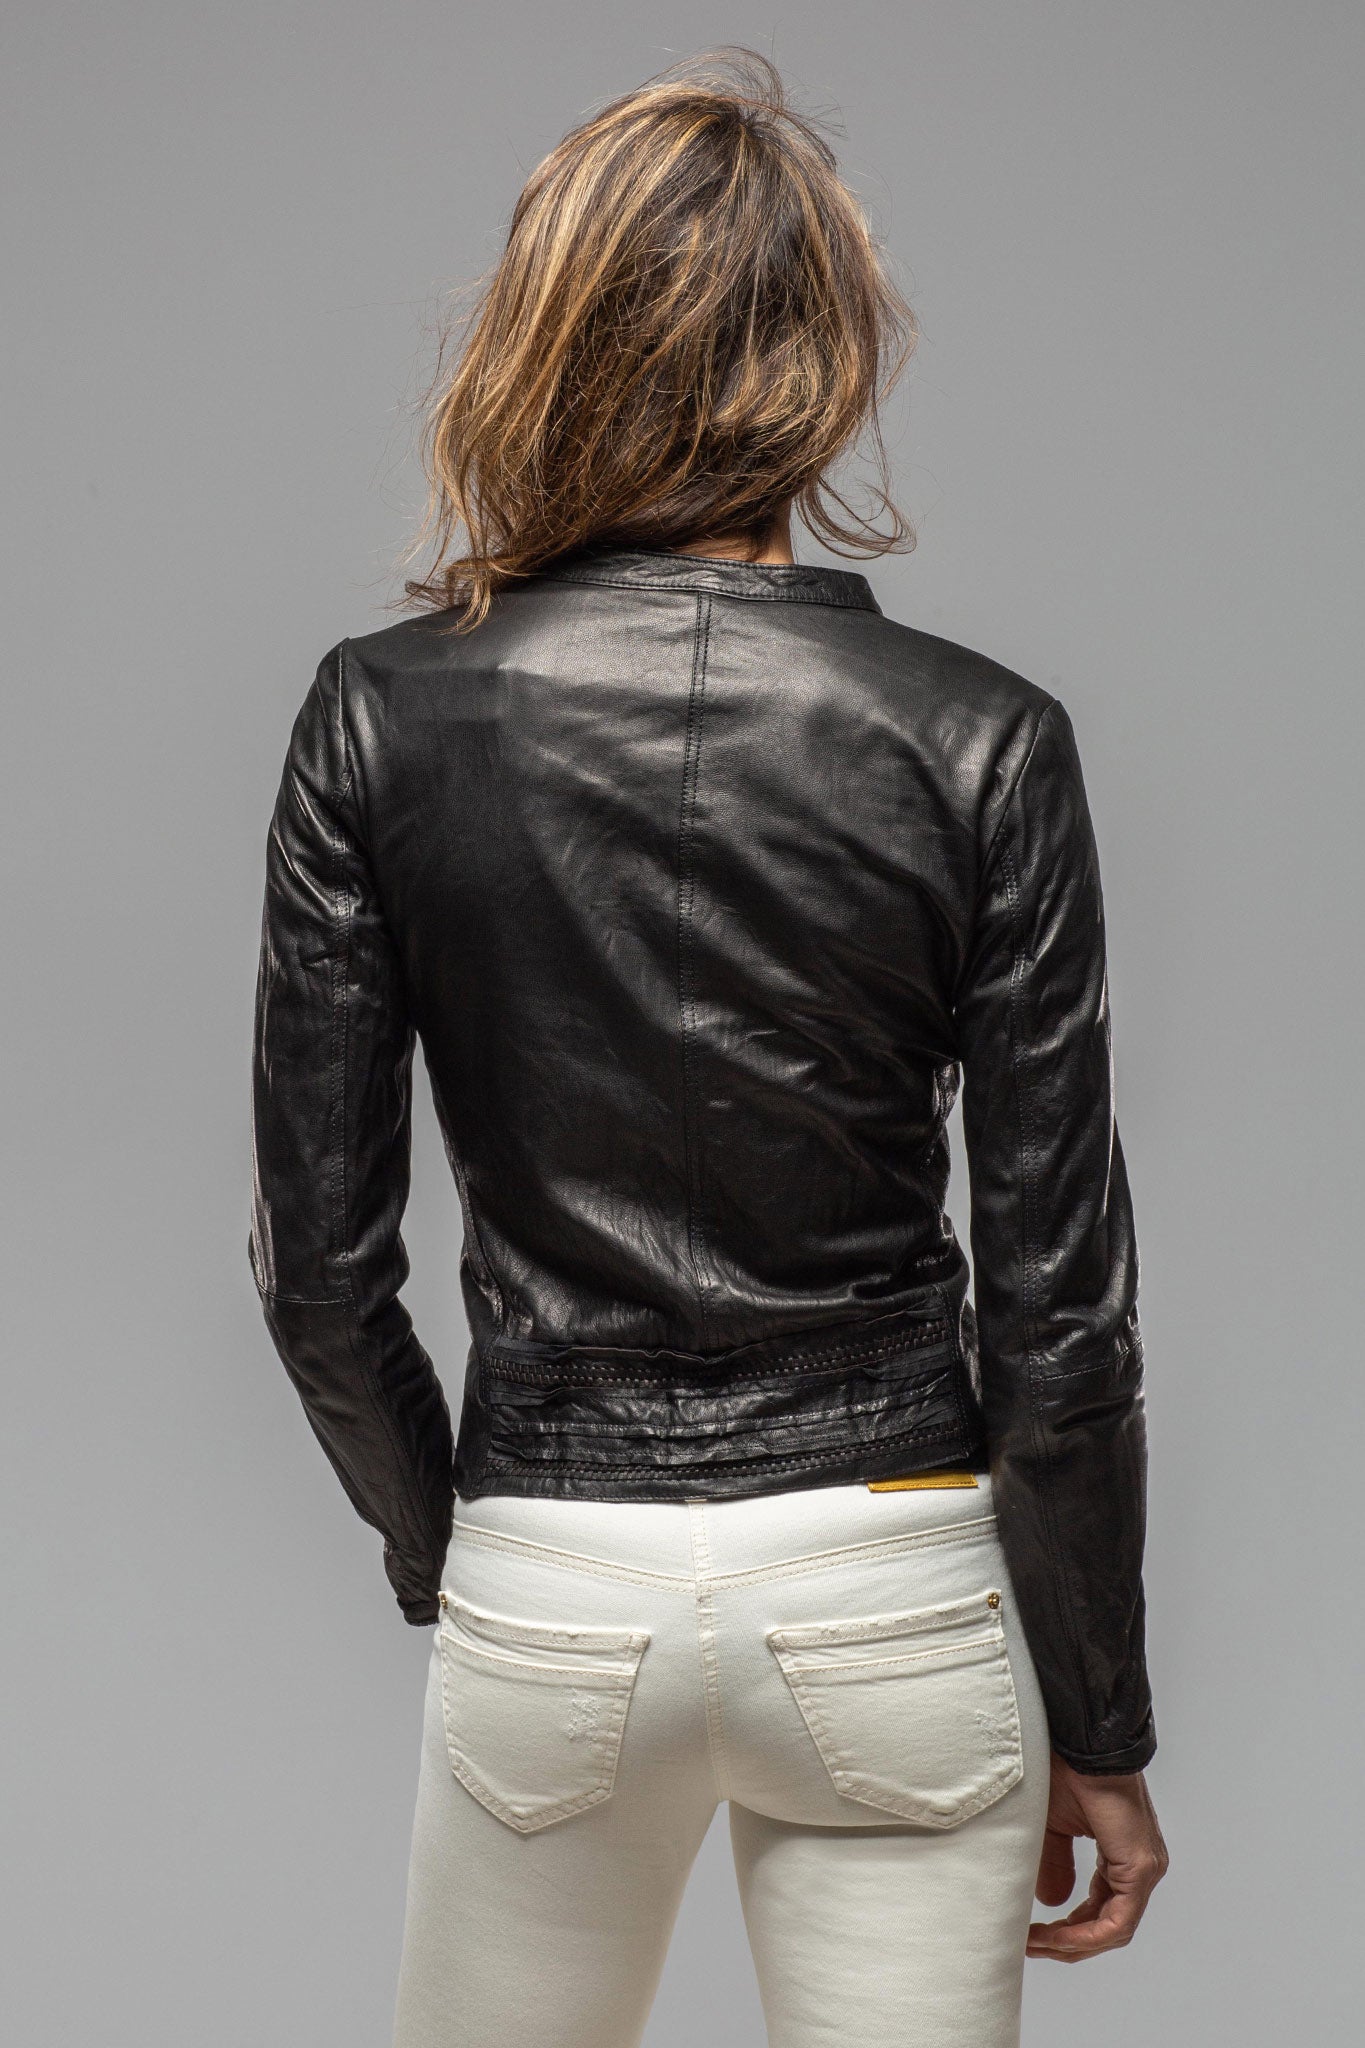 Becca Leather Jacket | Ladies - Outerwear - Leather | Roncarati